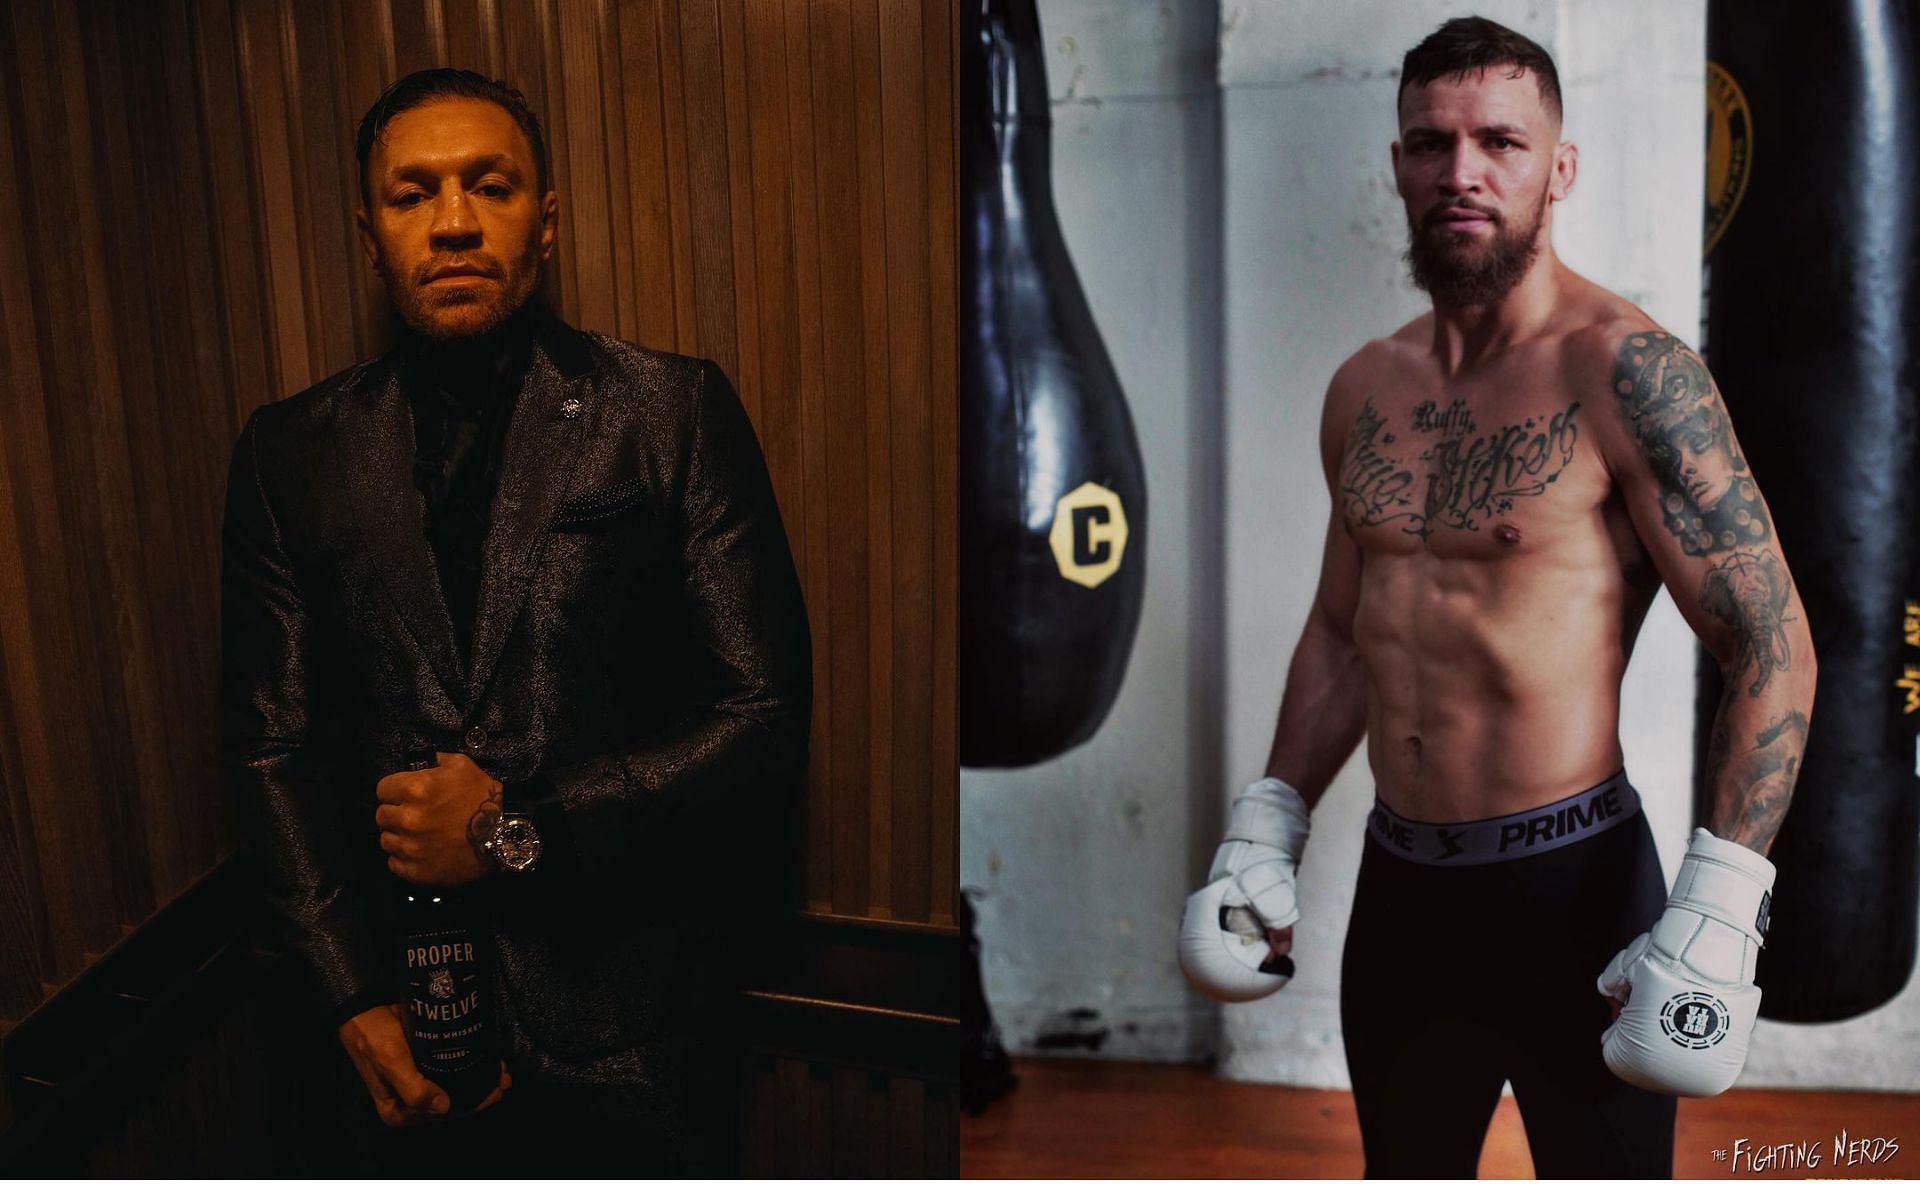 Mauricio Ruffy (right) reacts being compared to Conor McGregor (left) [Images courtesy: @ruffy_mma and @thenotoriousmma on Instagram]